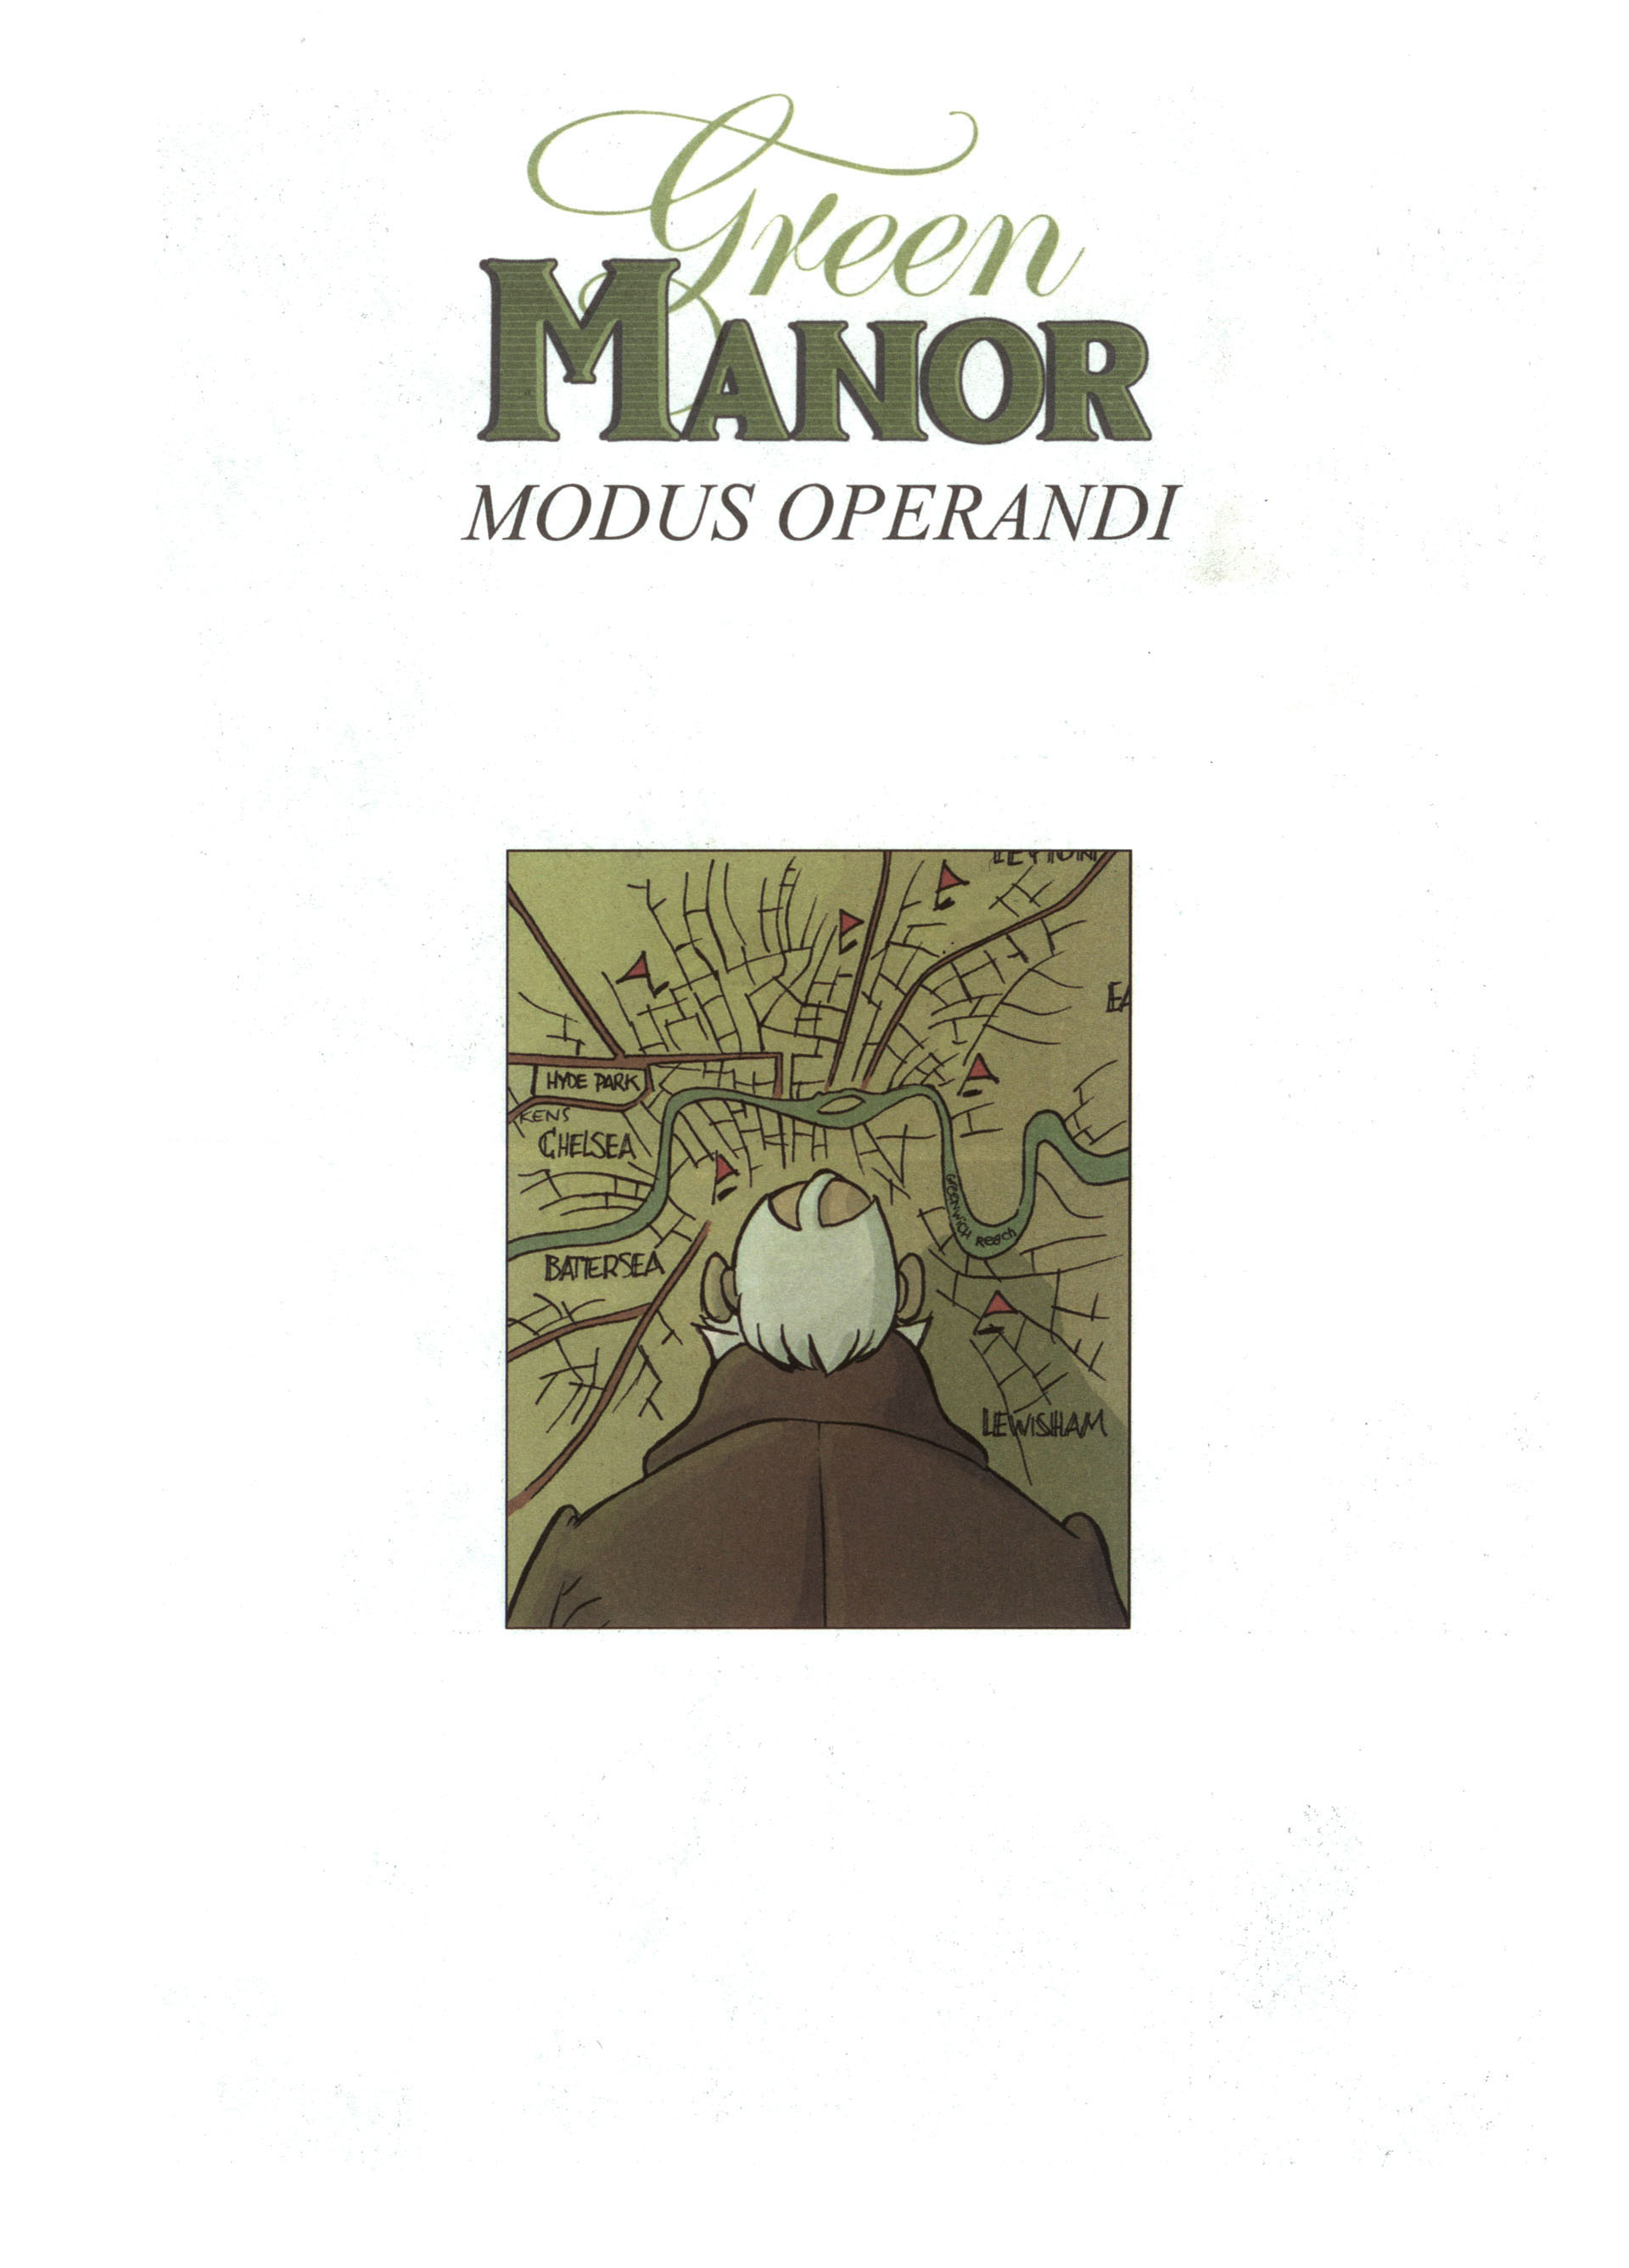 Read online Green Manor comic -  Issue #1 - 23